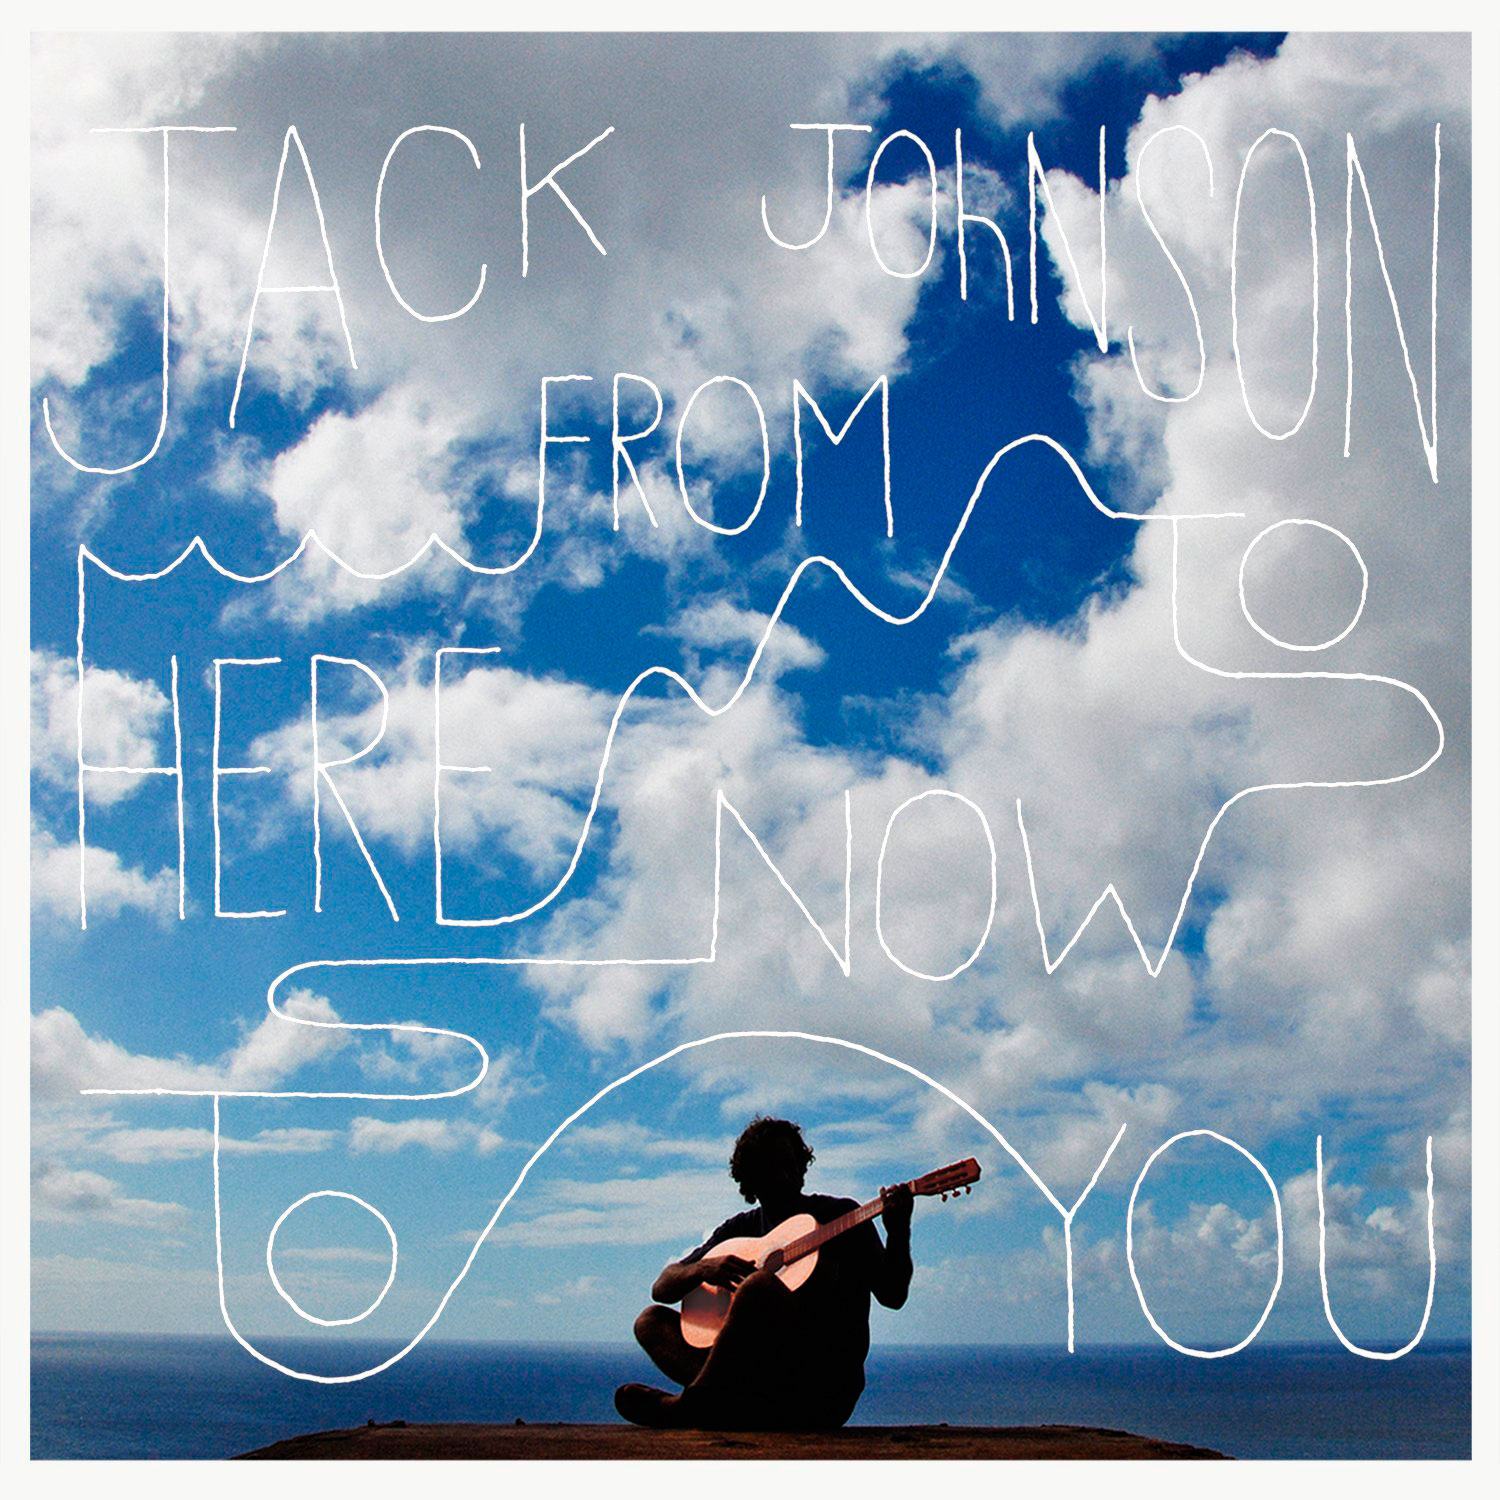 Jack Johnson: From here to now to you, la portada del disco